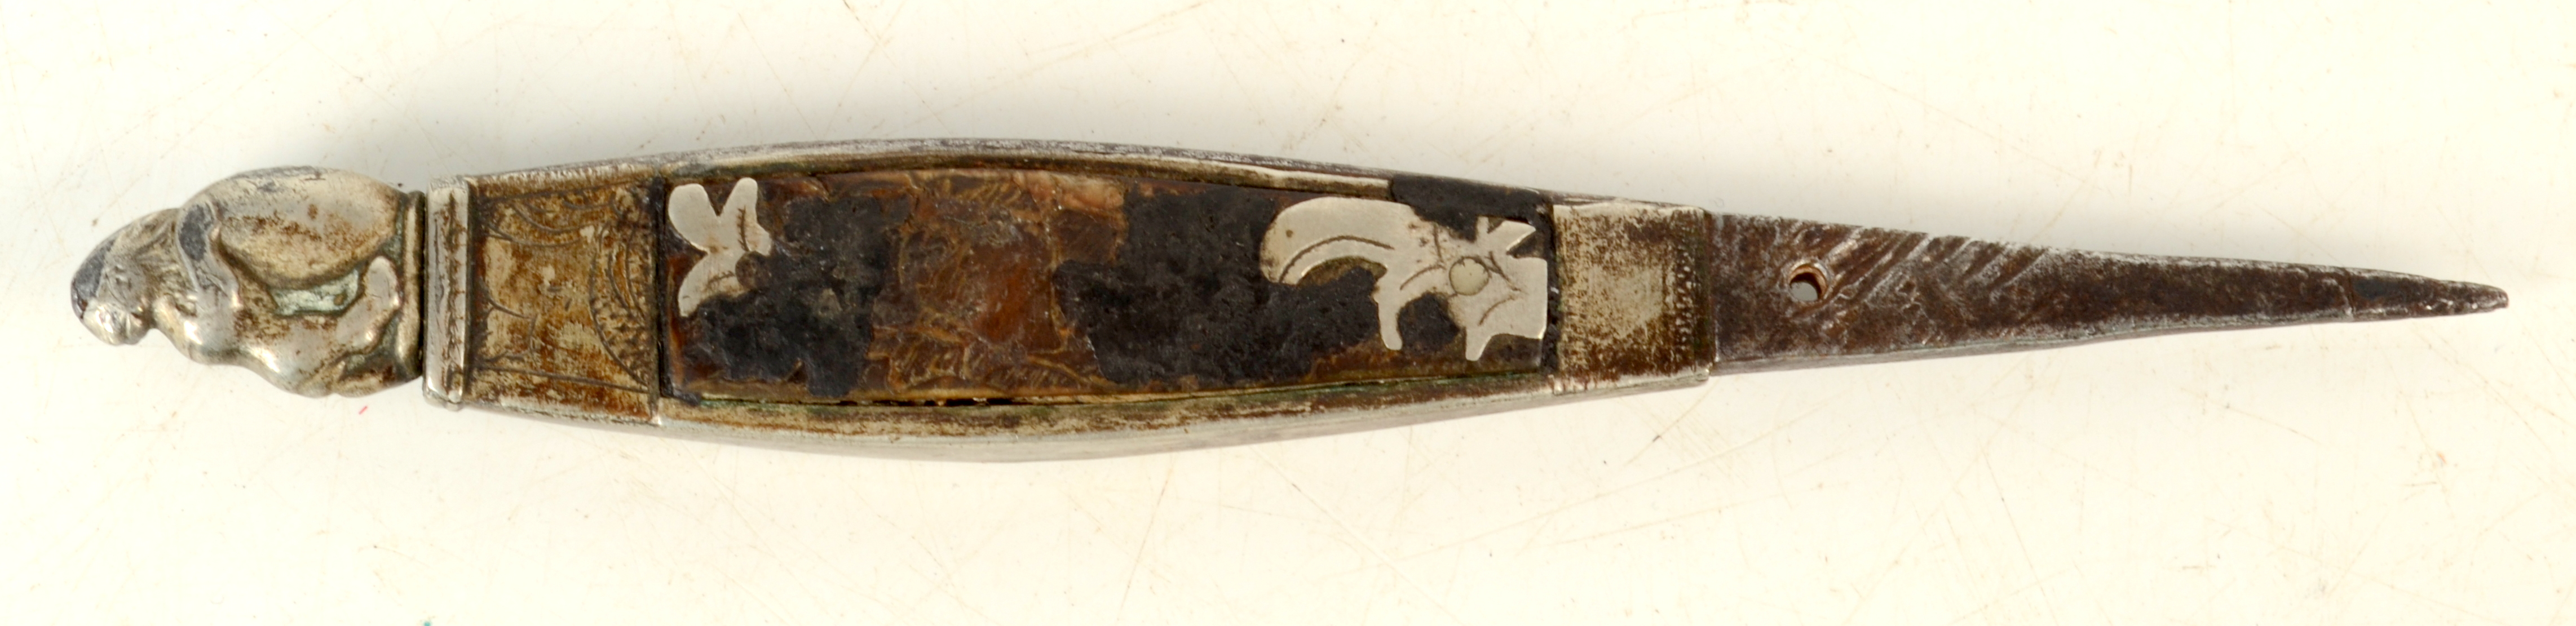 A 17th century marlin spike/sail needle, engraved JB, with a horn and white metal handle, length 13. - Image 2 of 4